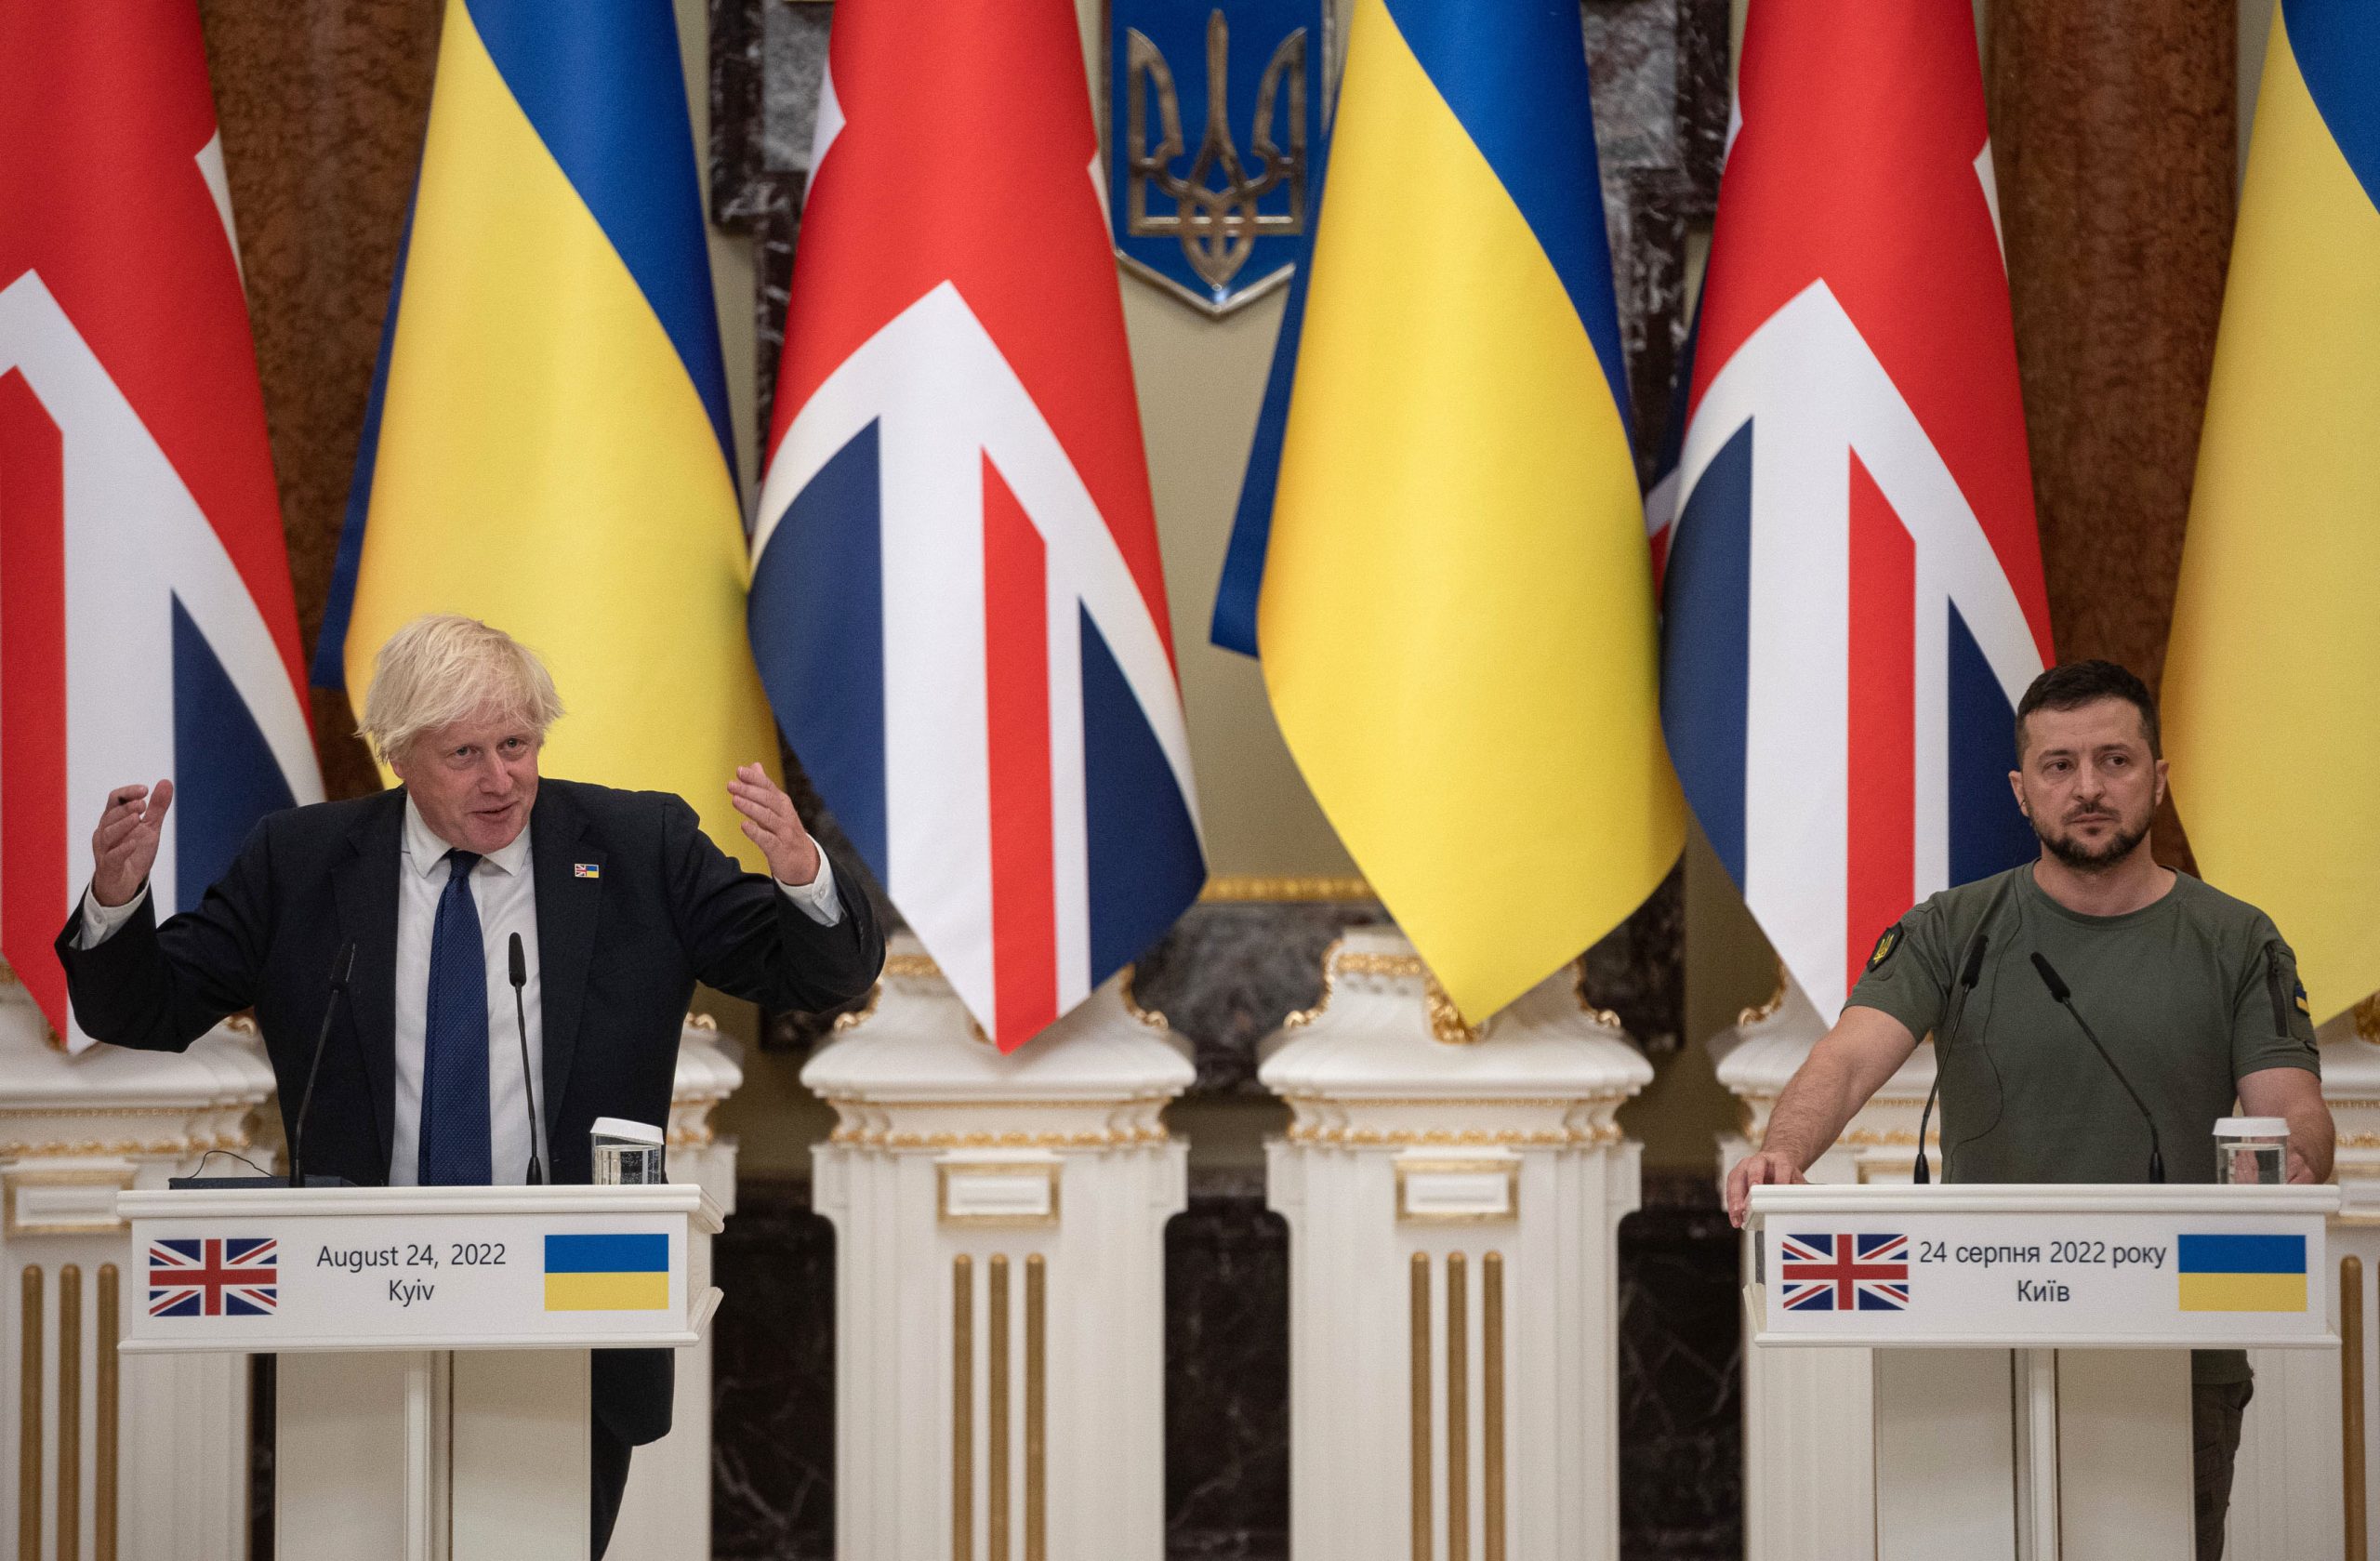 Ukrainian President Volodymyr Zelensky (R) listens to British Prime Minister Boris Johnson as they give a press conference on August 24, 2022 in Kyiv, Ukraine. (Photo by Alexey Furman/Getty Images)